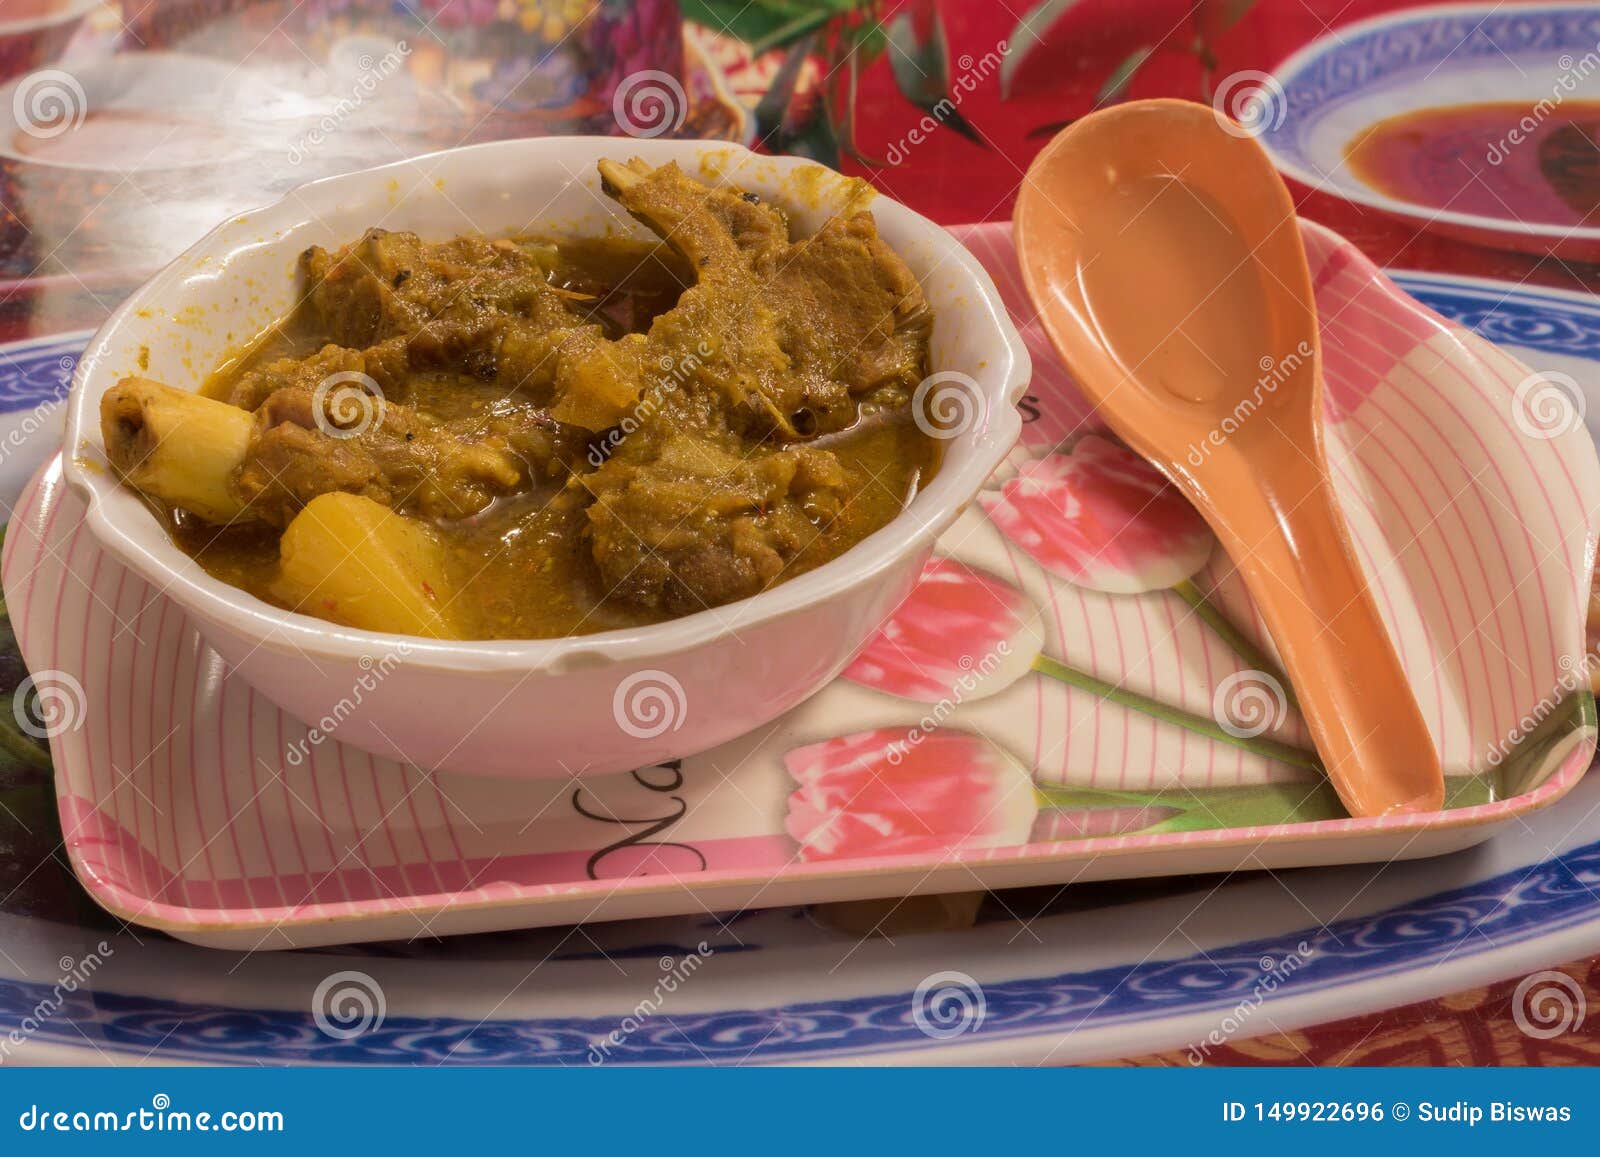 Mutton Curry Recipe Is Typical Of Bengal And Bihar Made With Goat Meat And Spices Like Garam Masala Coriander And Cumin This Stock Photo Image Of India Cuisine 149922696,Bloody Mary Mix